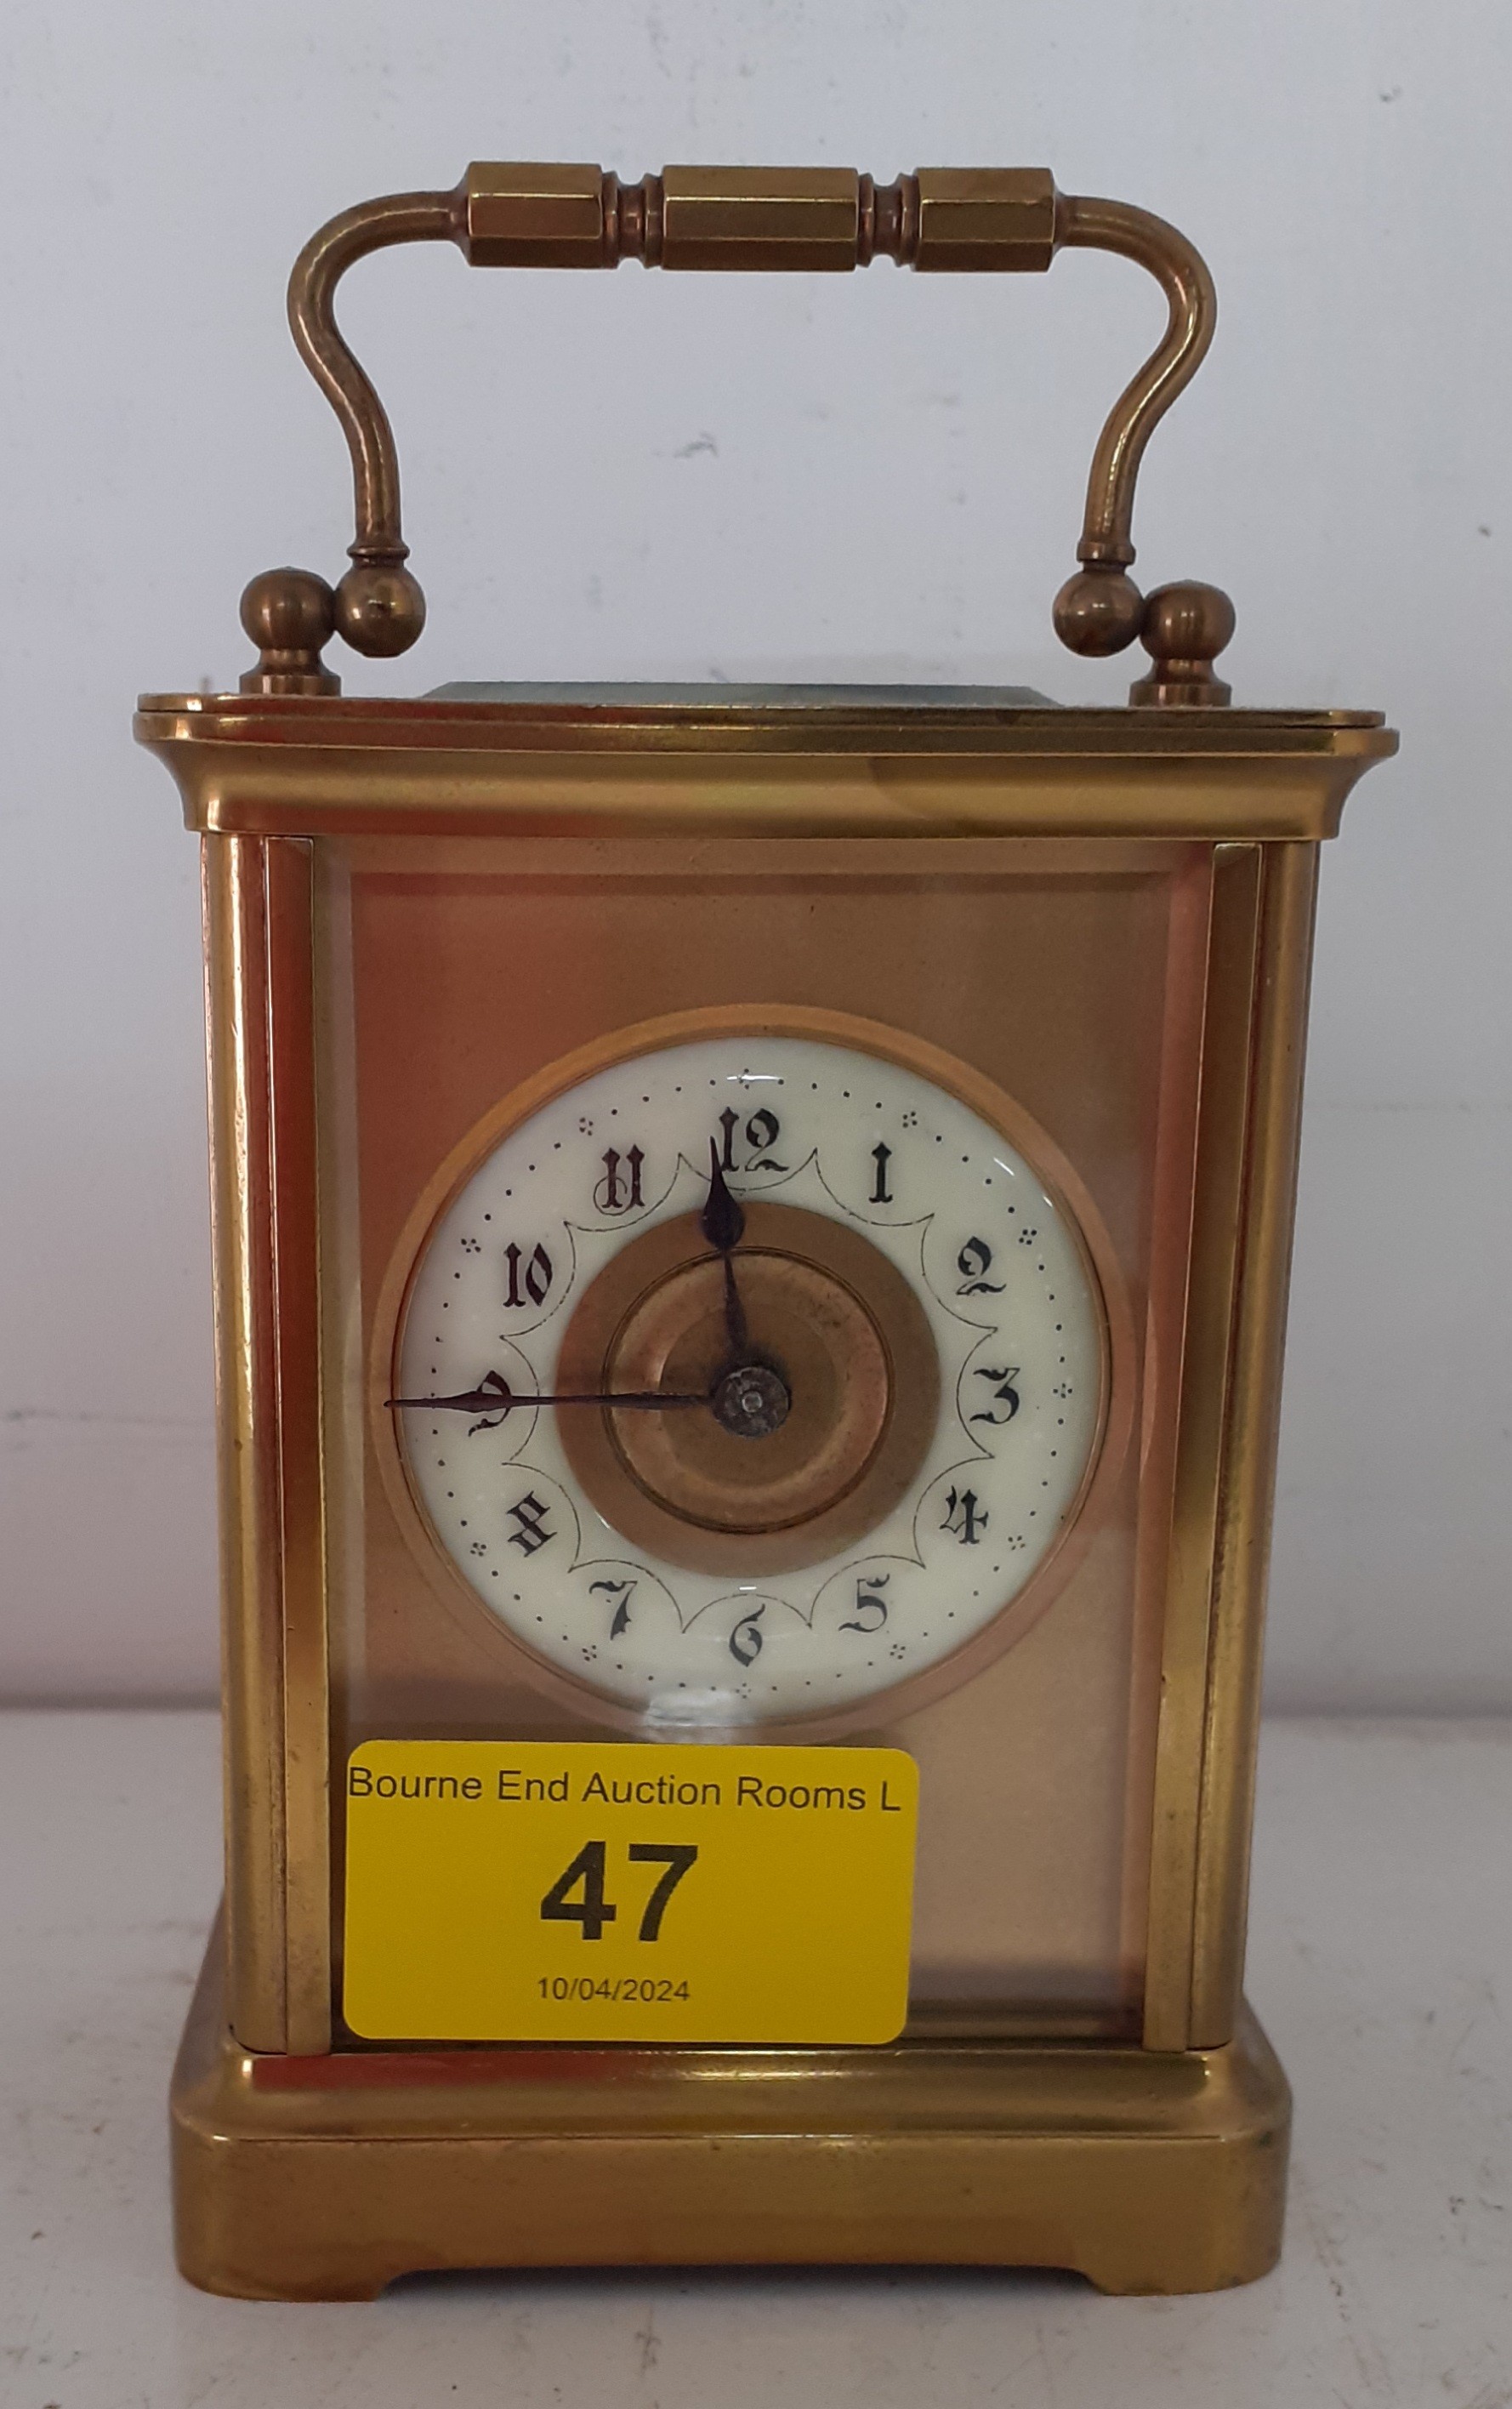 A 5 window brass framed carriage clock with partial enamelled dial, no key Location: 1:1